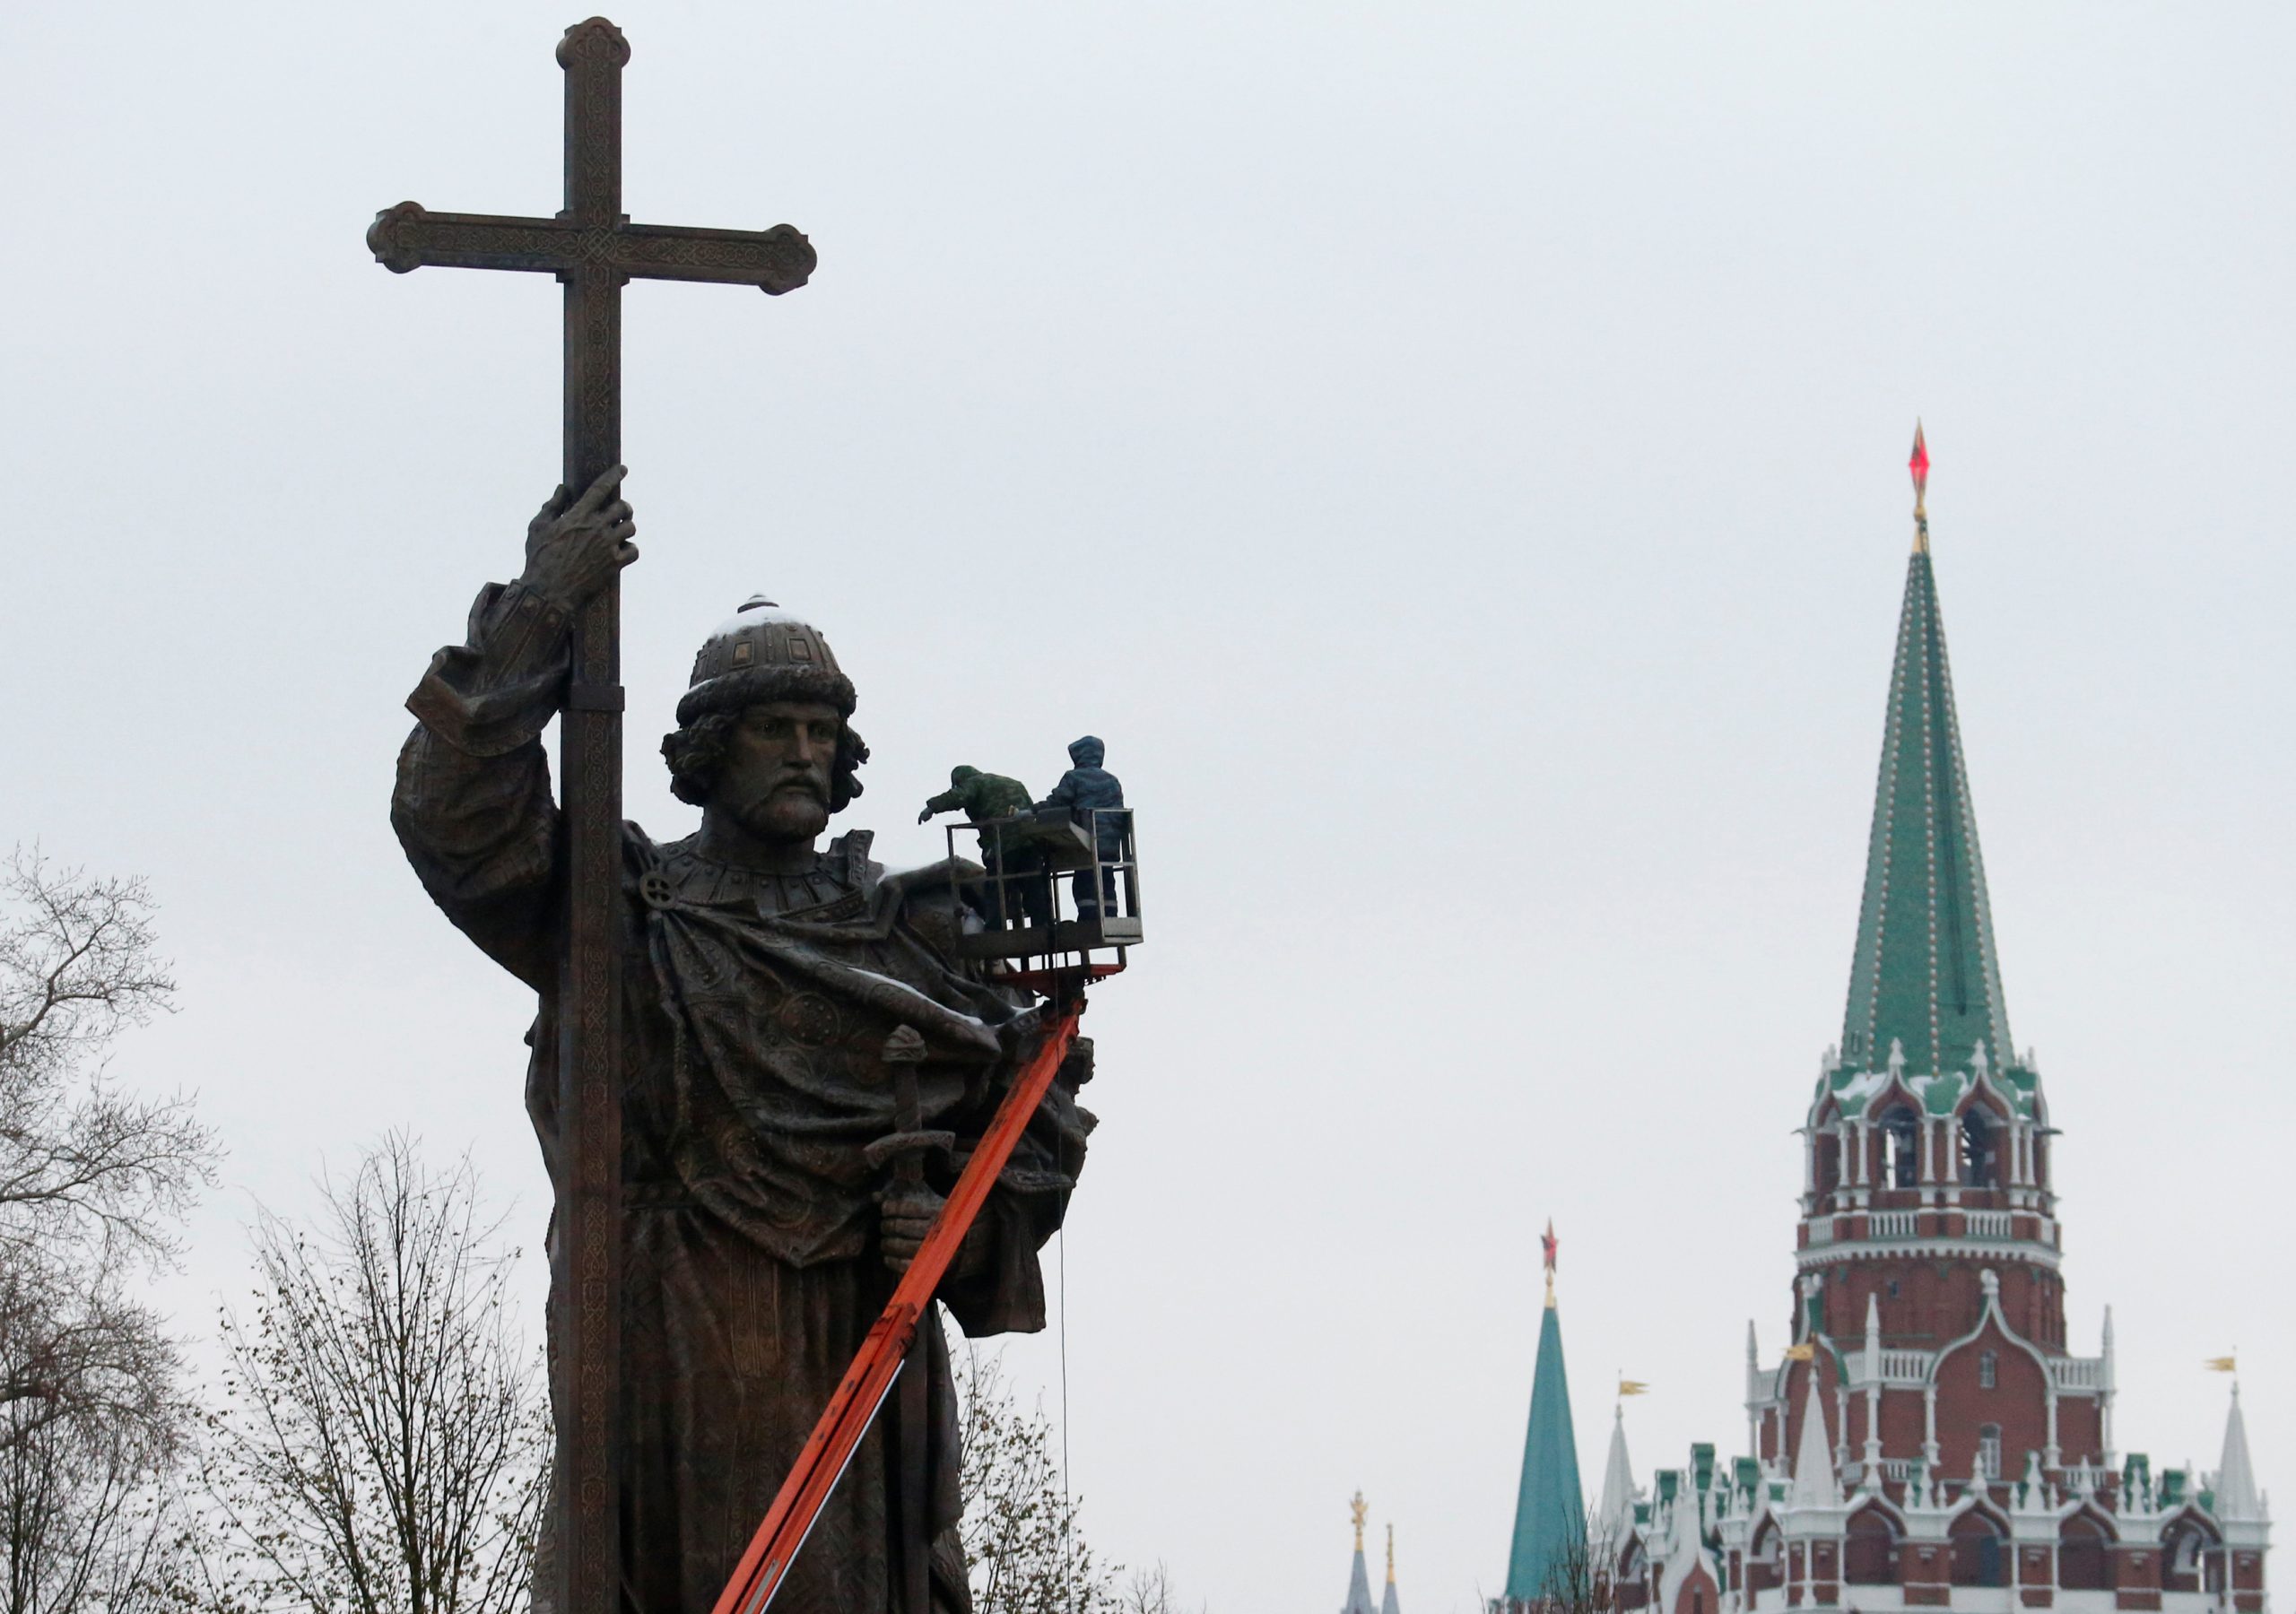 Photo: Employees work on the newly erected monument of grand prince Vladimir I, who initiated the christianization of Kievan Rus' in 988AD, with towers of the Kremlin seen in the background, in central Moscow, Russia, November 2, 2016. Credit: REUTERS/Maxim Zmeyev